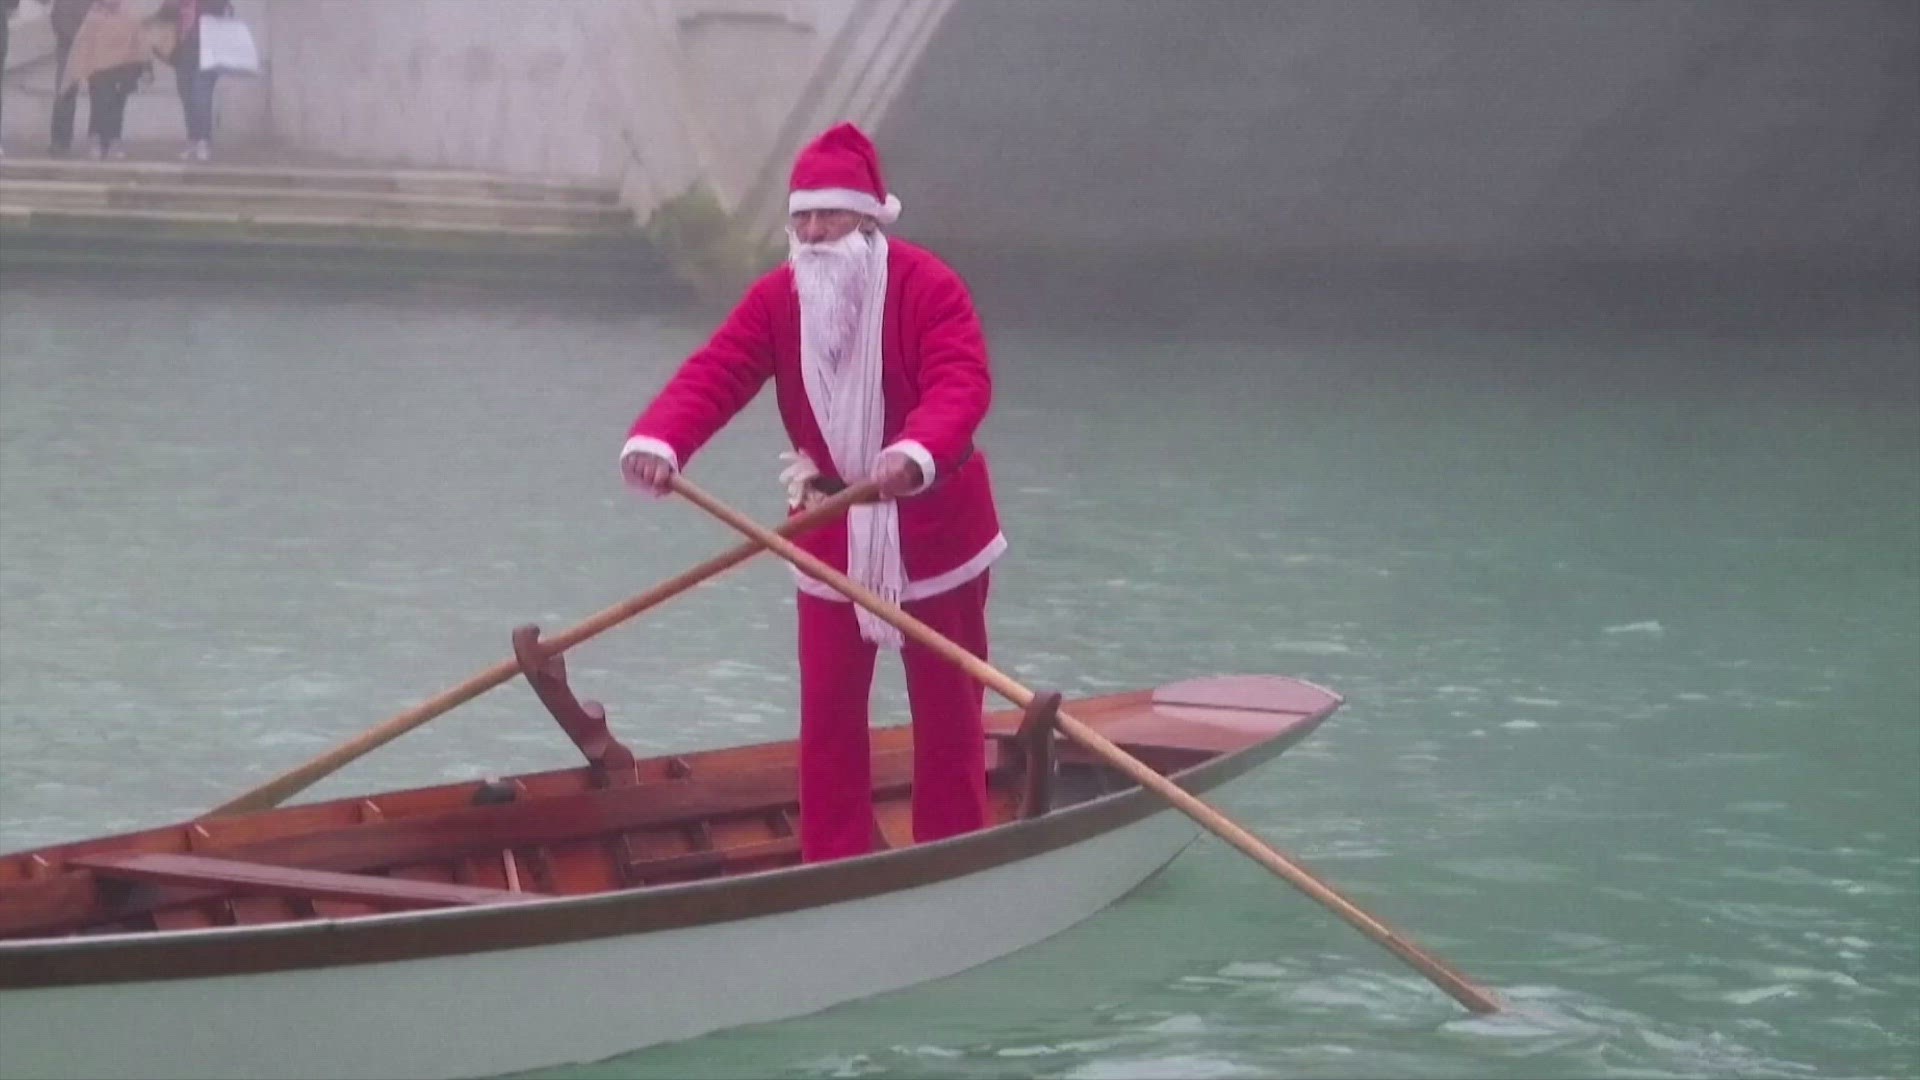 The Santas in Venice Italy took their cheer to the water for a Christmas Regatta. Buzz60's Keri Lumm has more.